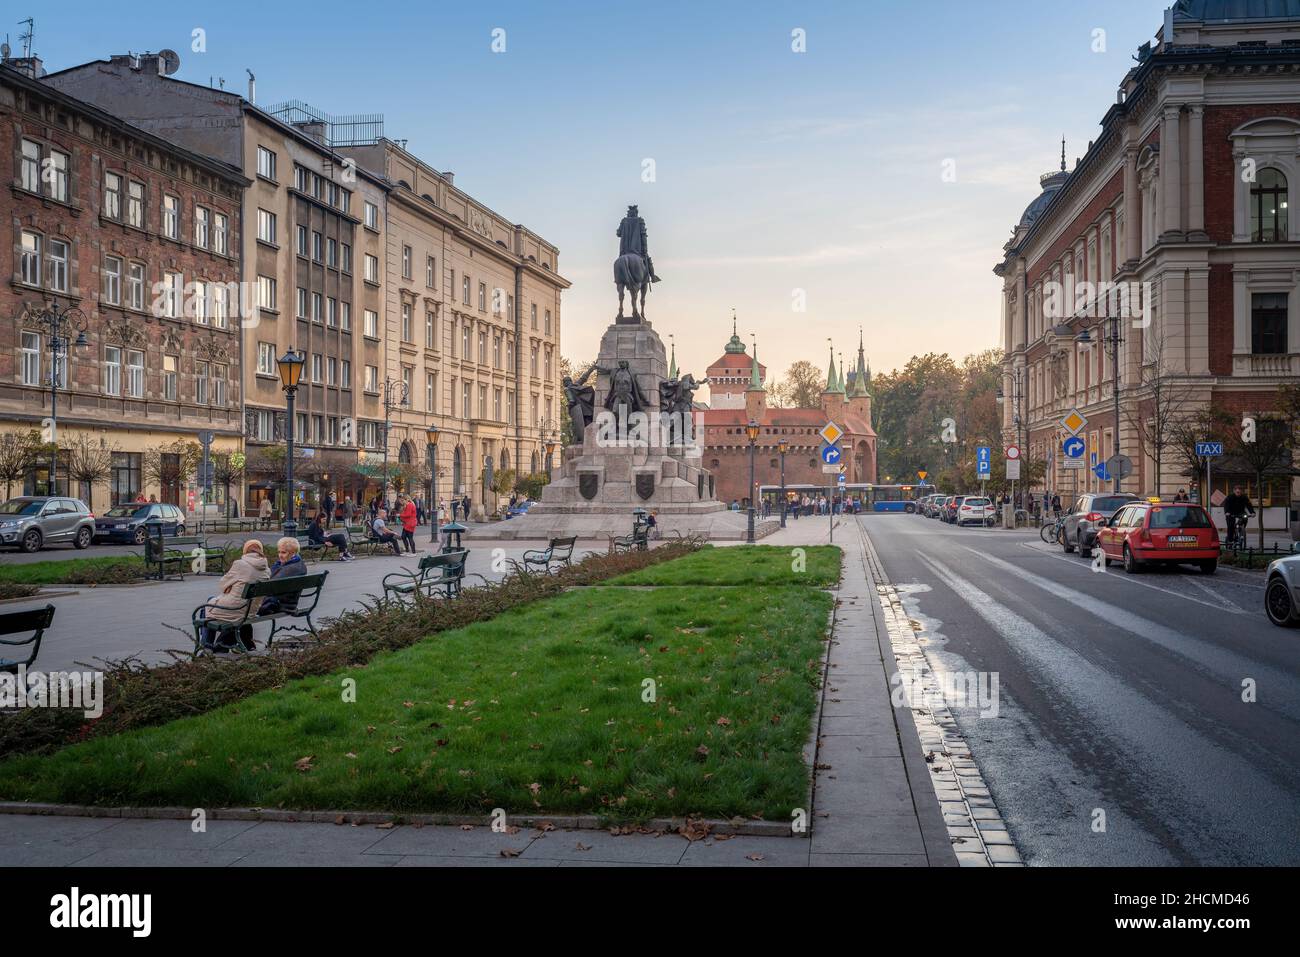 Jan Matejko Square and Grunwald Monument with Barbican in the background - Krakow, Poland Stock Photo